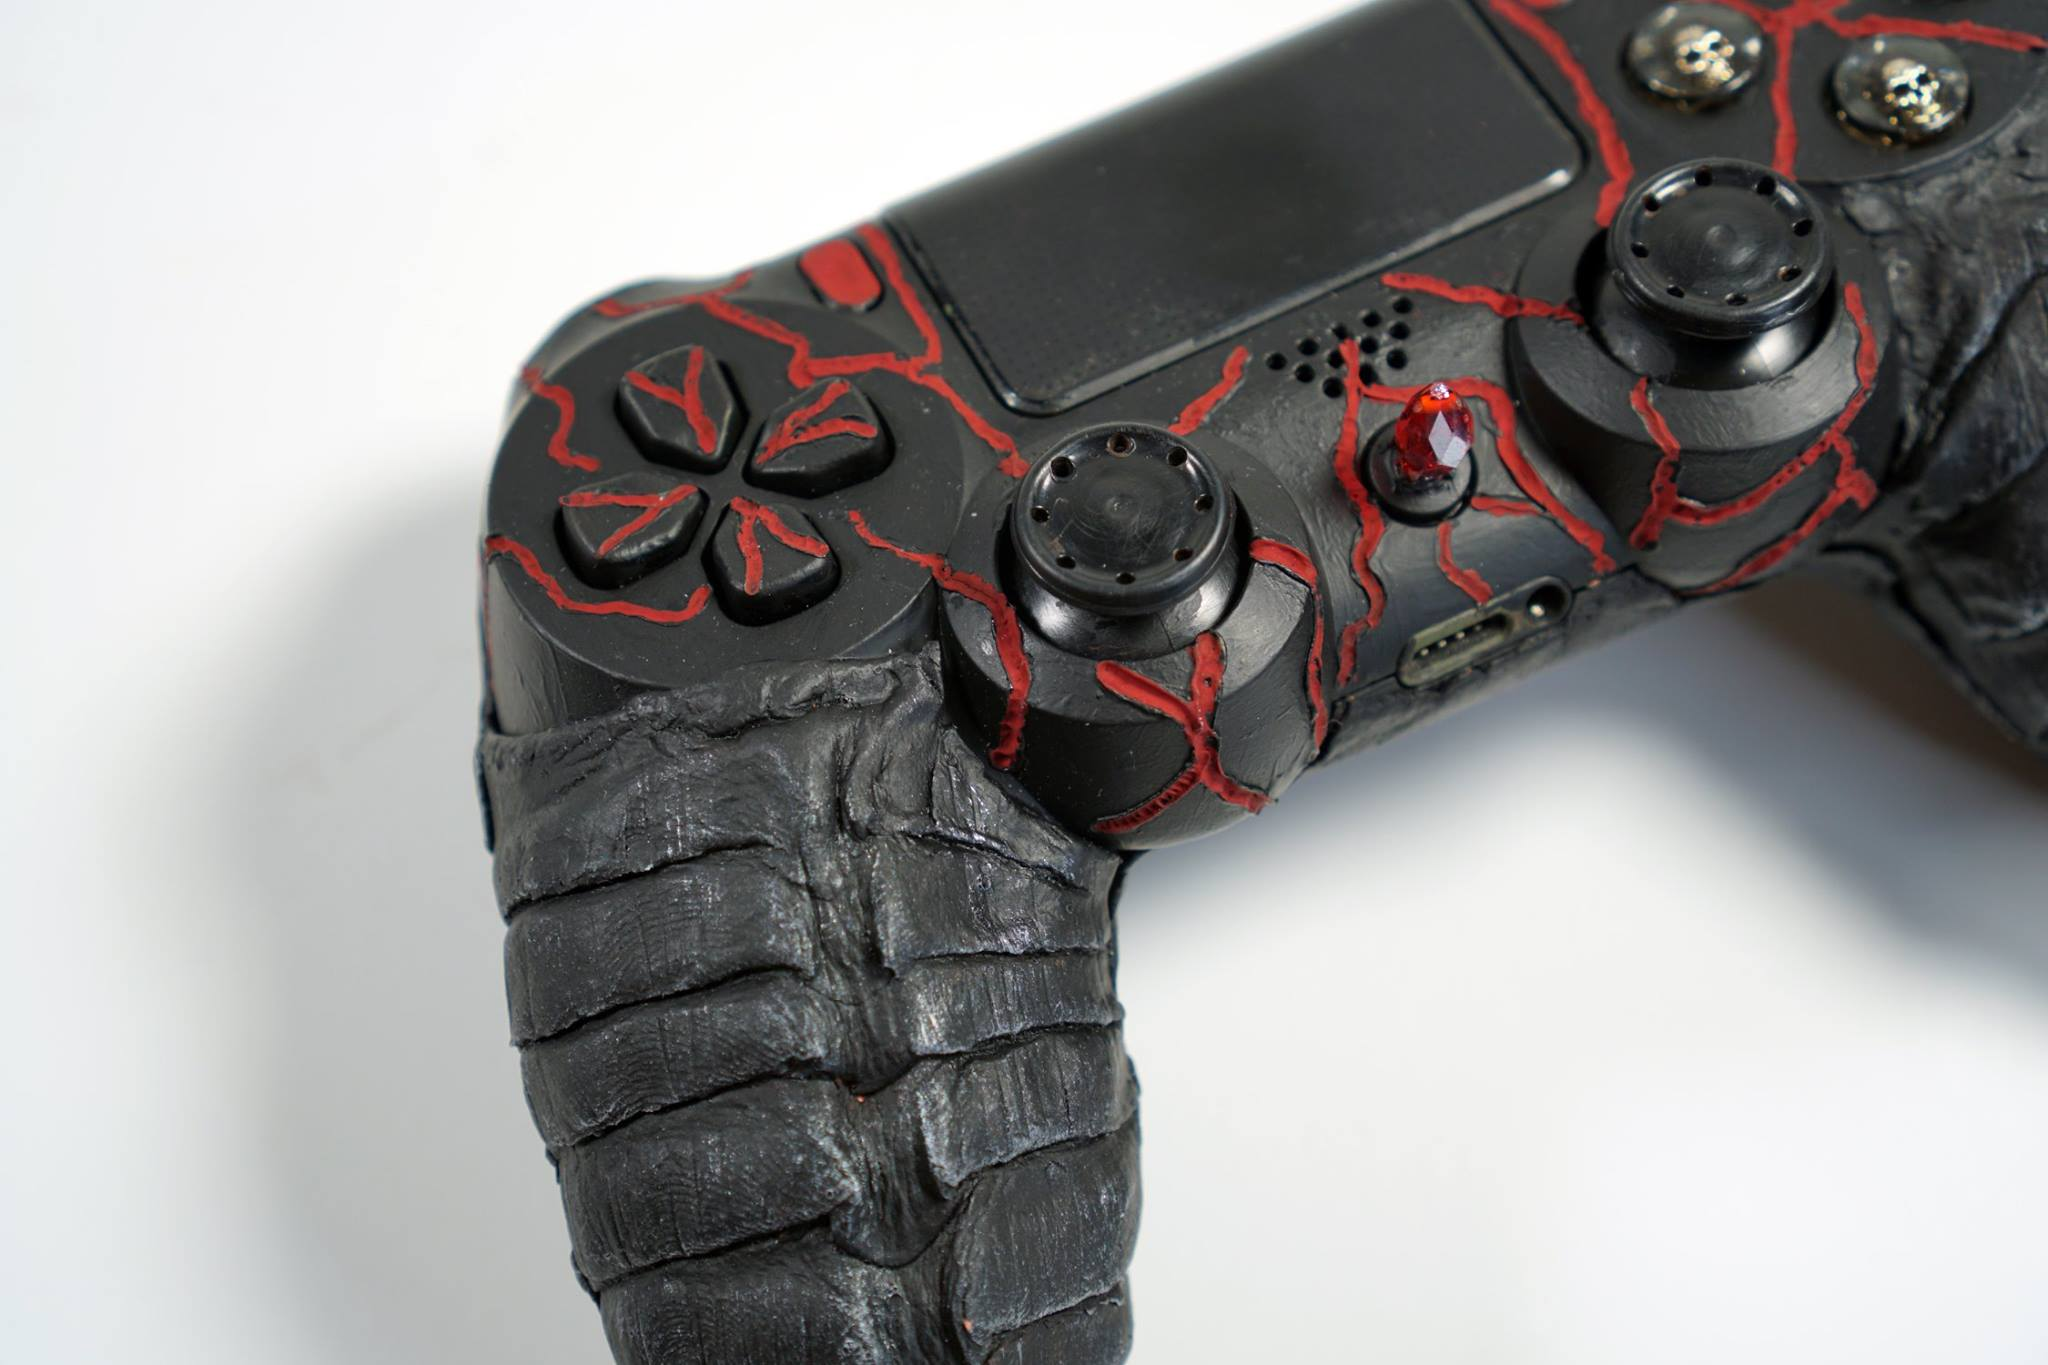 In Case You Wanted A PS4 Controller With Giant Fangs On It